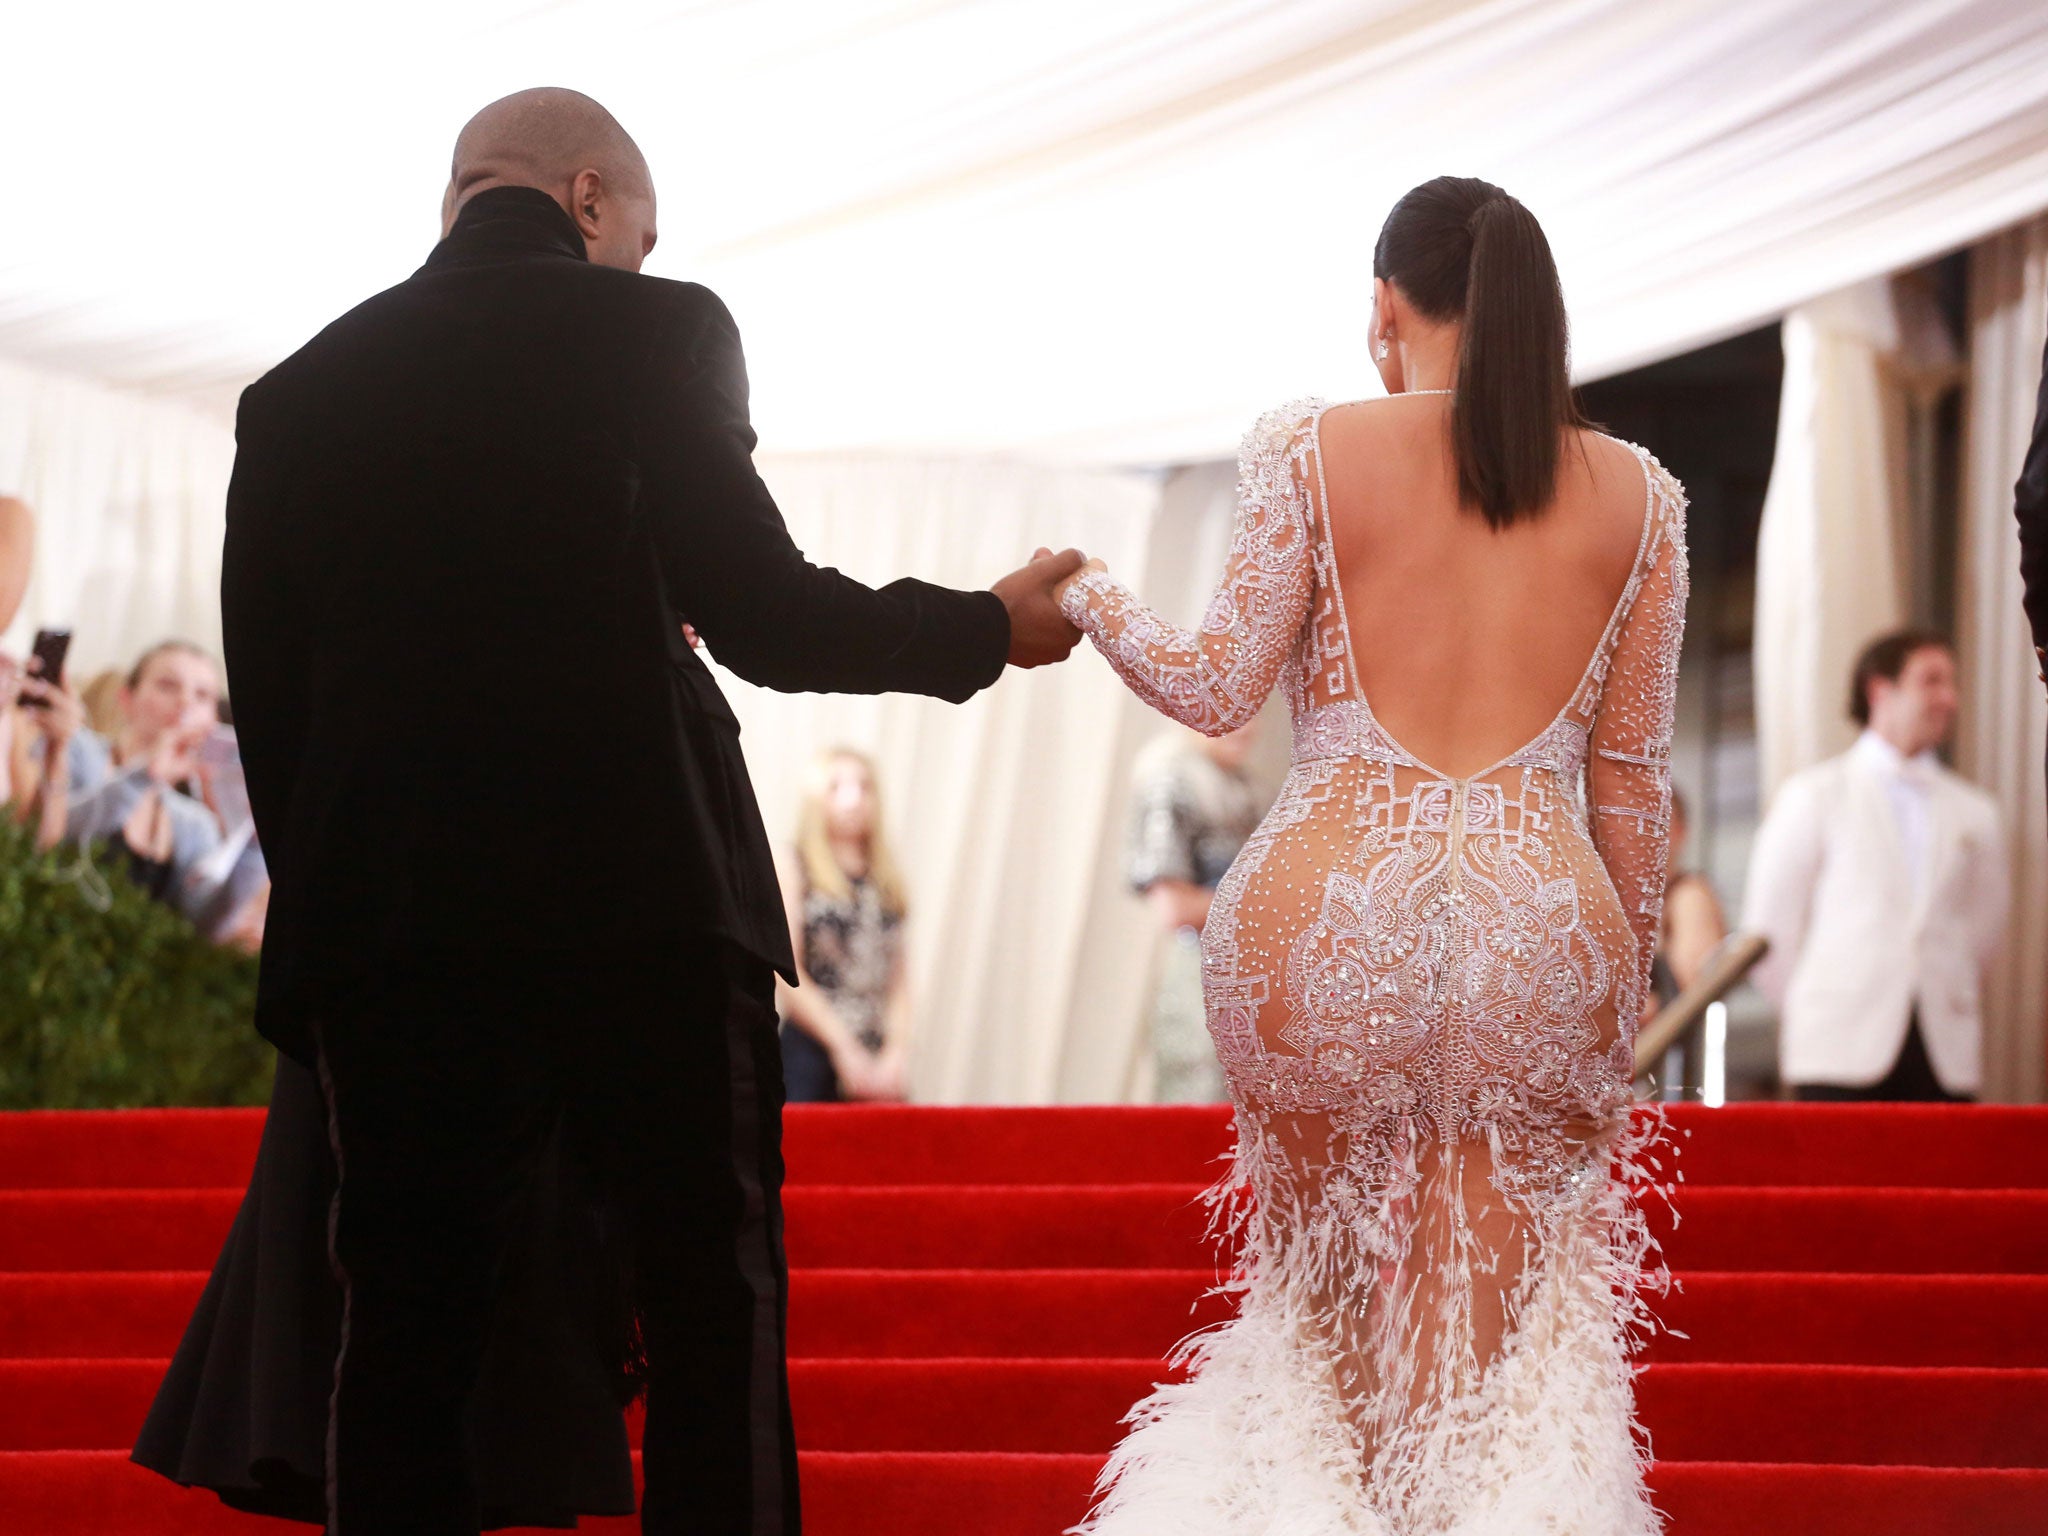 The rear is having a ‘moment’: Kanye West and Kim Kardashian